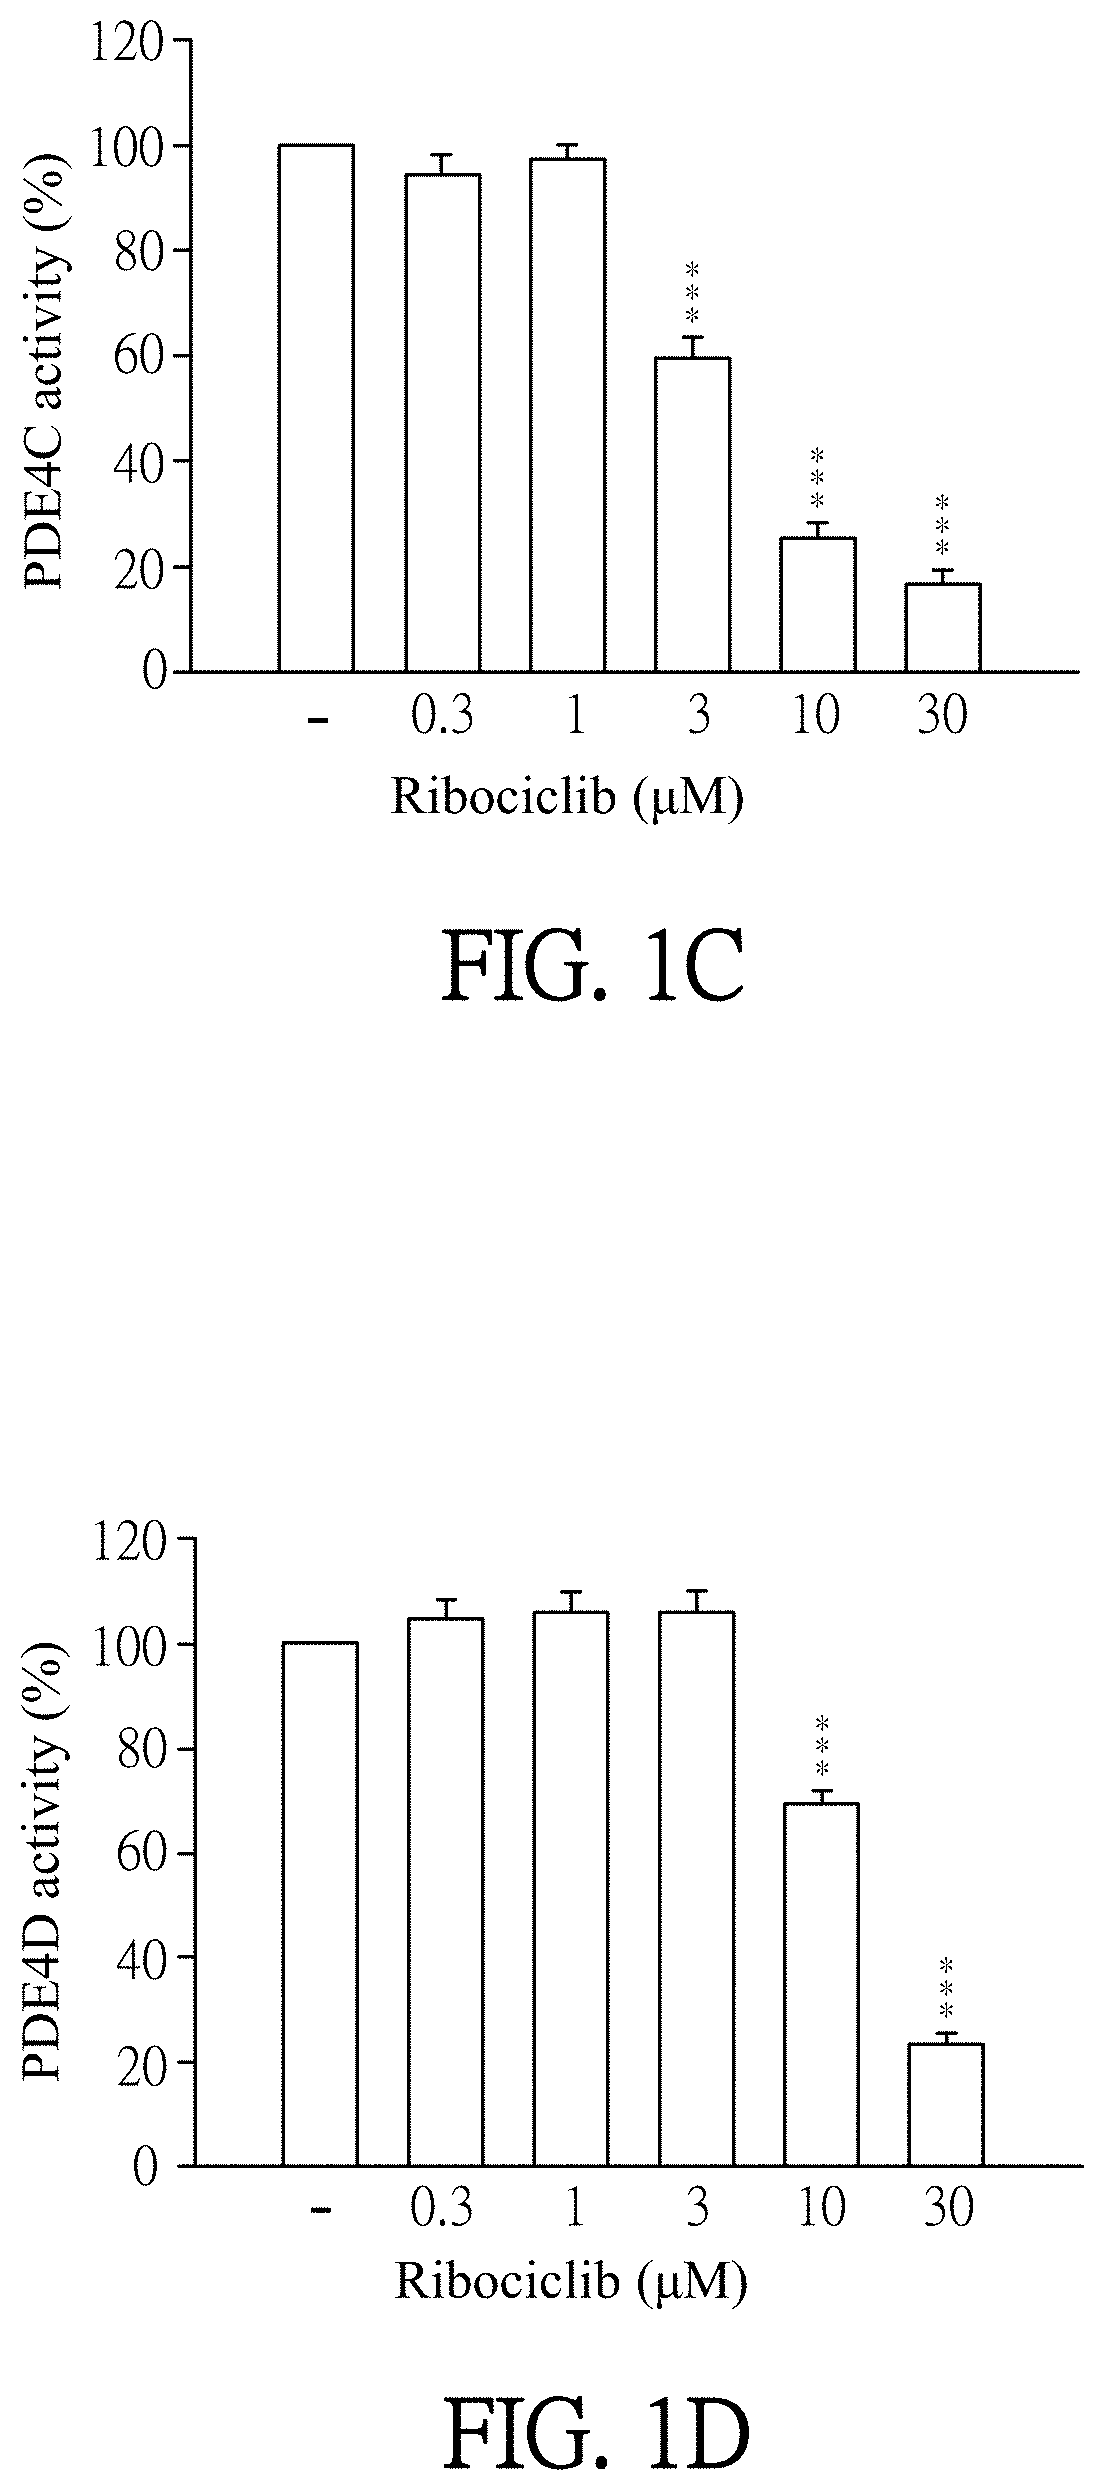 Pharmaceutical composition and use for applying ribociclib in phosphodiesterase 4-mediated disease treatment of patient and inhibition of phosphodiesterase 4 activity